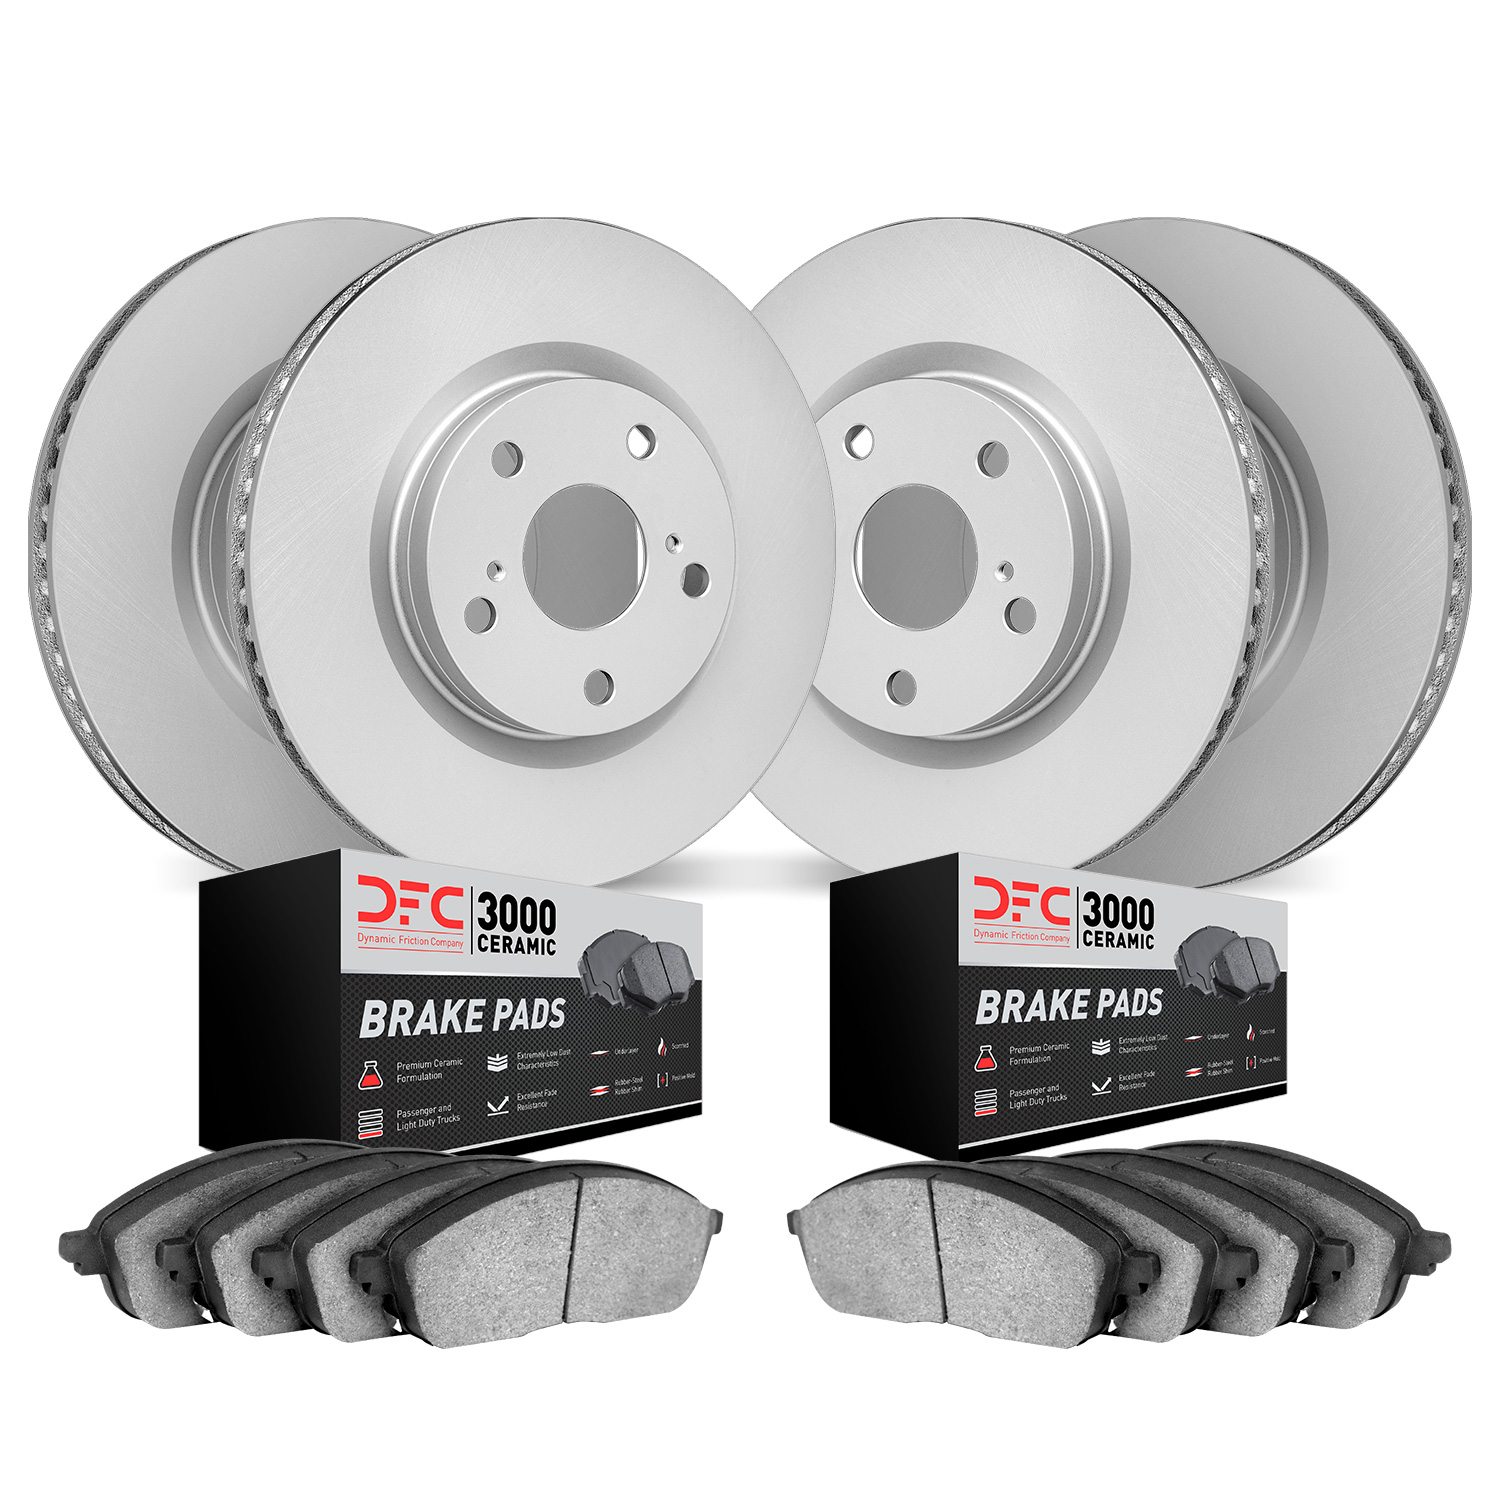 4304-31015 Geospec Brake Rotors with 3000-Series Ceramic Brake Pads Kit, 1999-2006 BMW, Position: Front and Rear